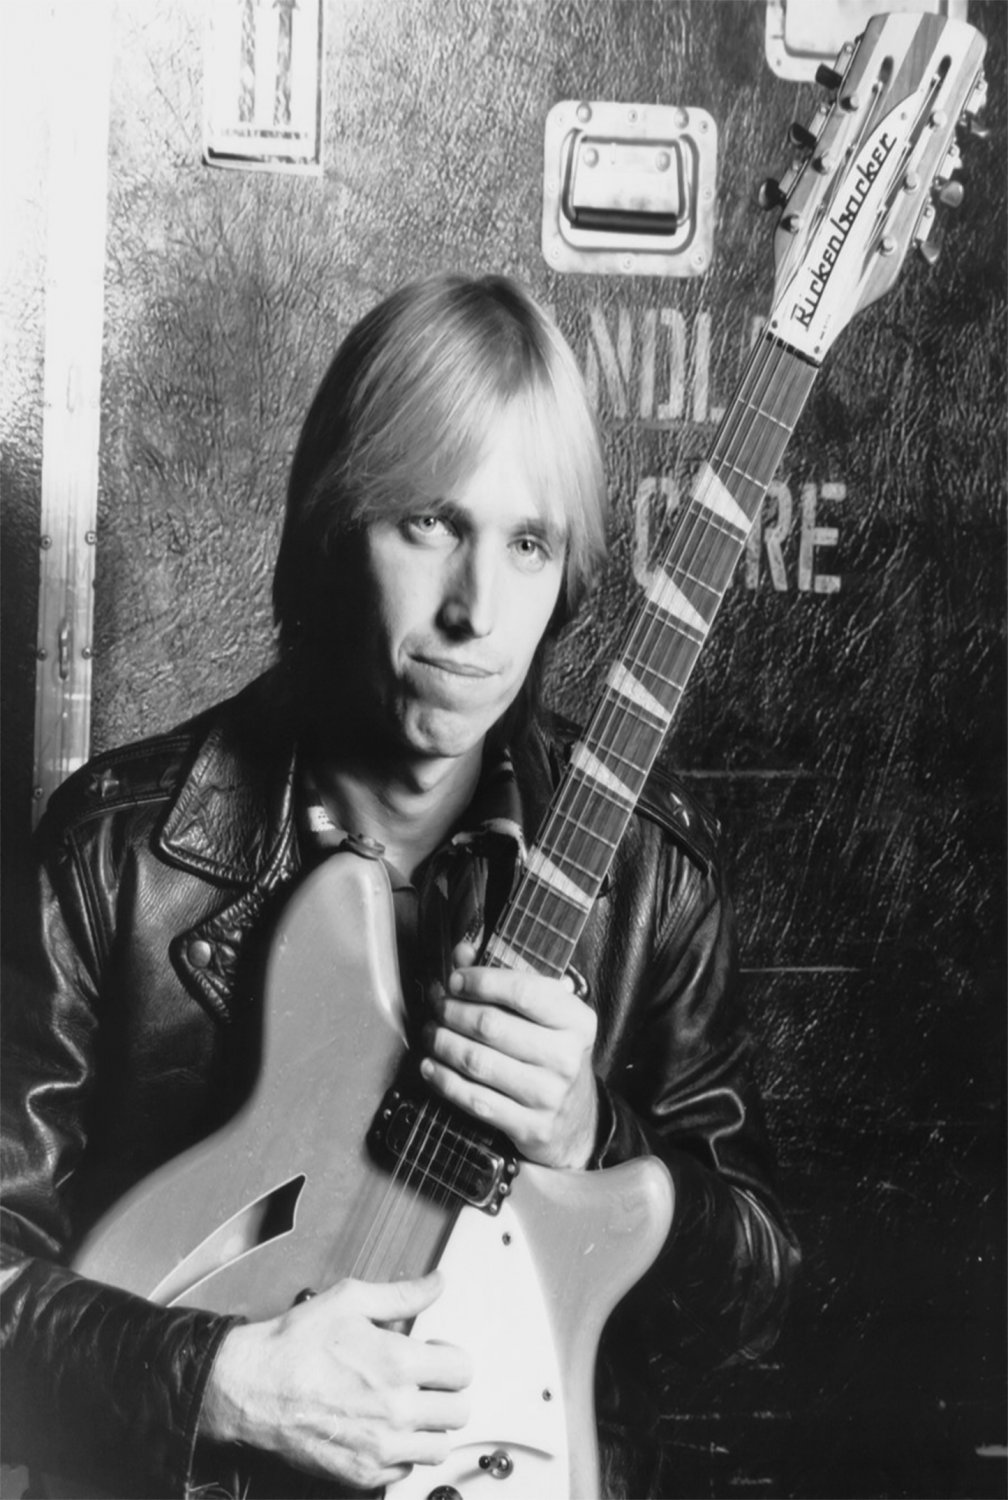 Tom Petty   13"x19" (32cm/49cm) Polyester Fabric Poster